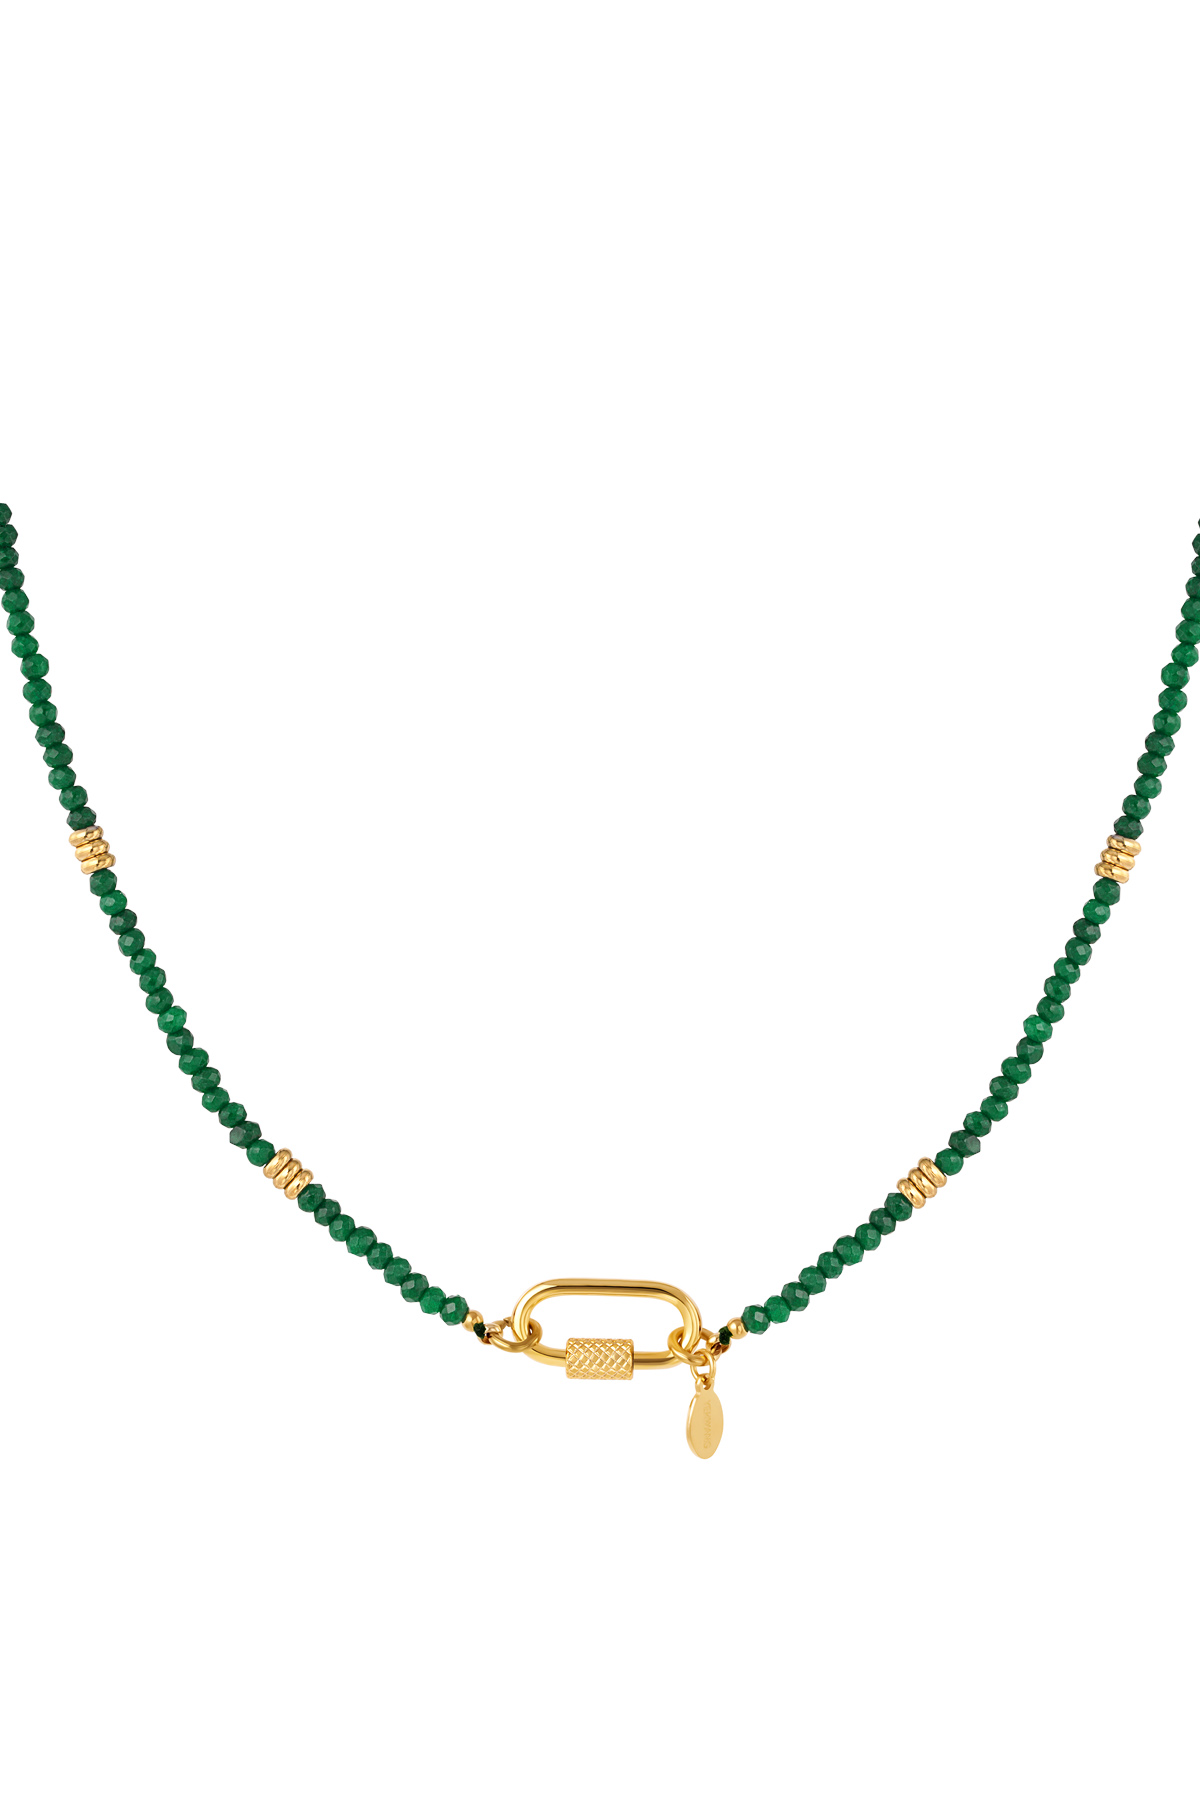 Necklace lobster clasp Green Stone h5 